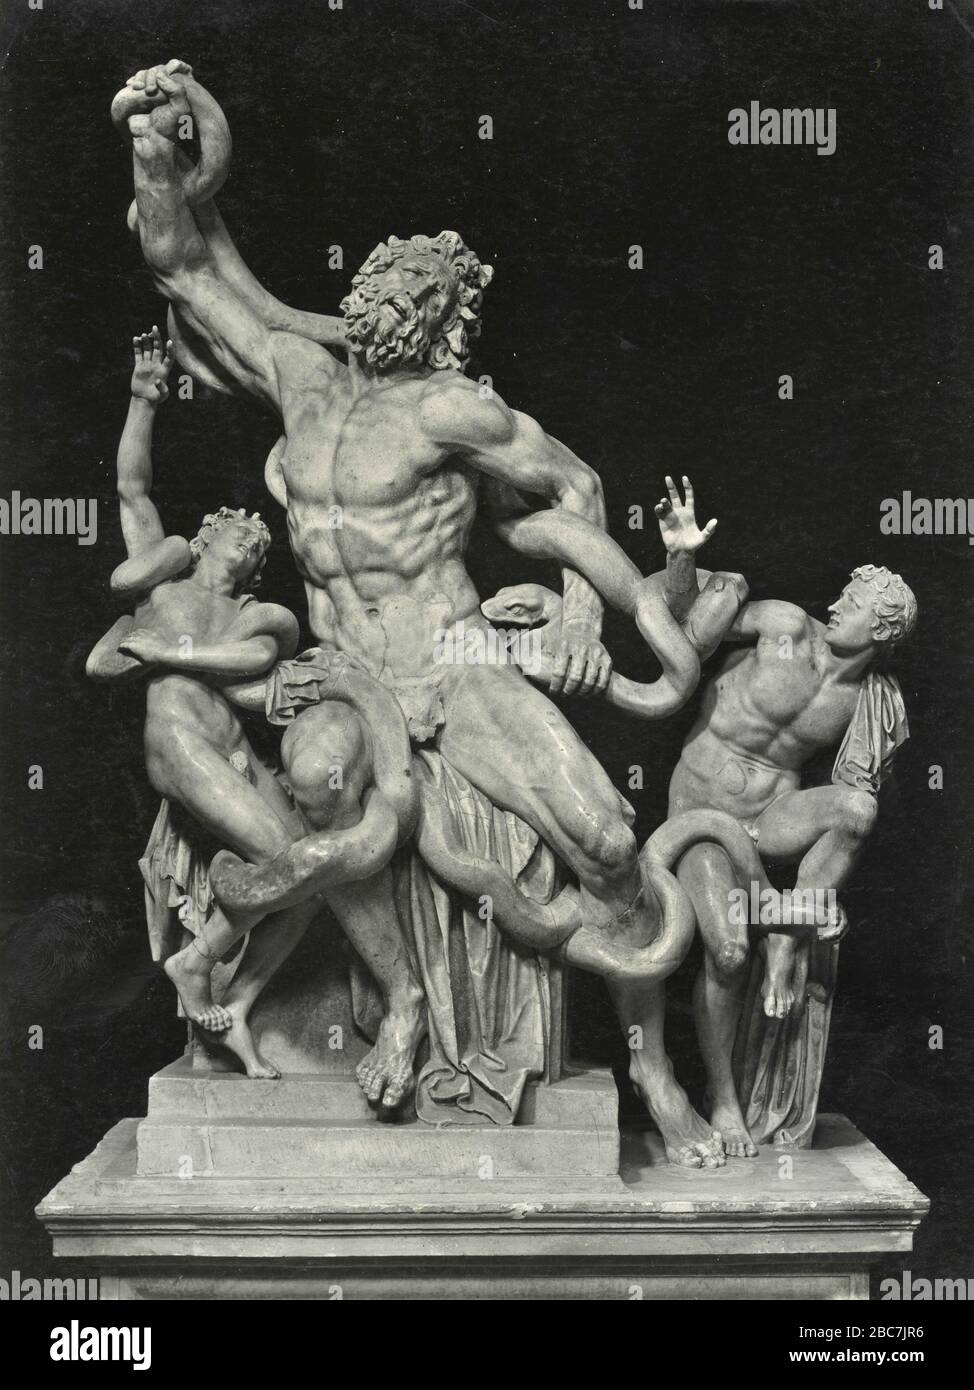 Laocoon and his Sons, marble statue by Greek artists Agesandro, Polidoro, and Athenodorus of Rhodes, Vatican Museums, Rome, Italy 1910s Stock Photo